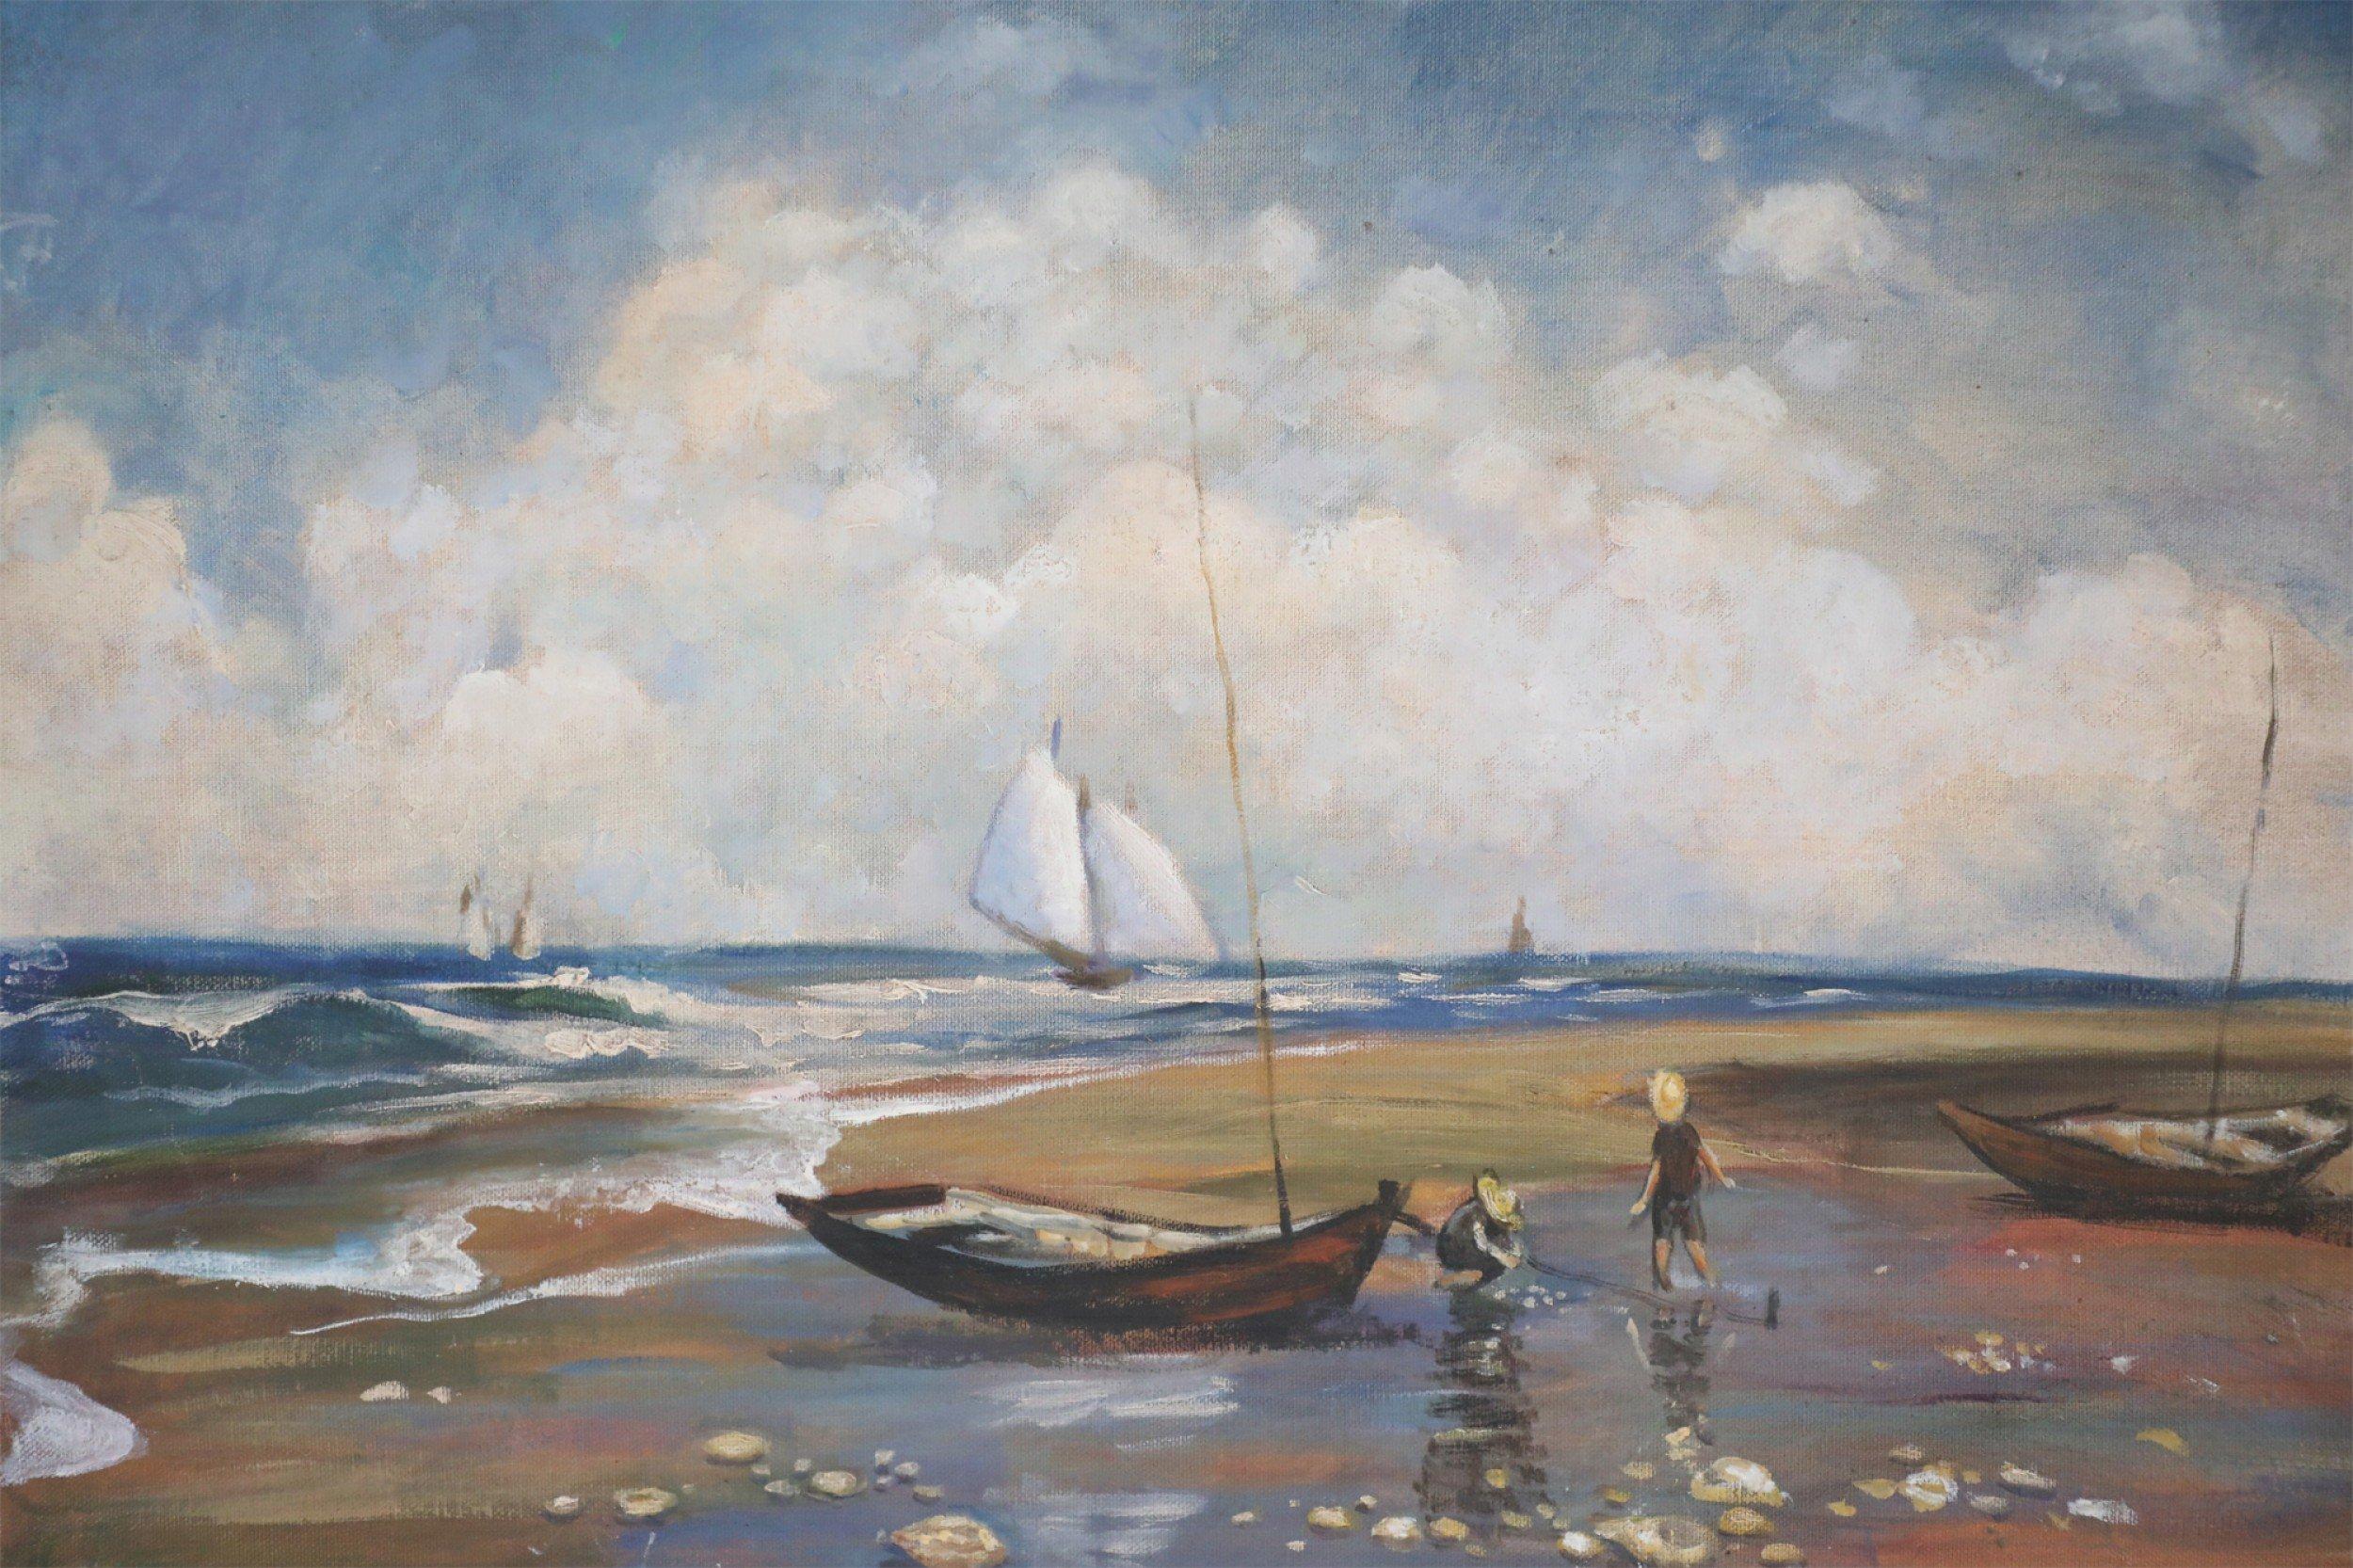 Oiled Fishermen and Sailboats Seascape Oil Painting on Canvas For Sale